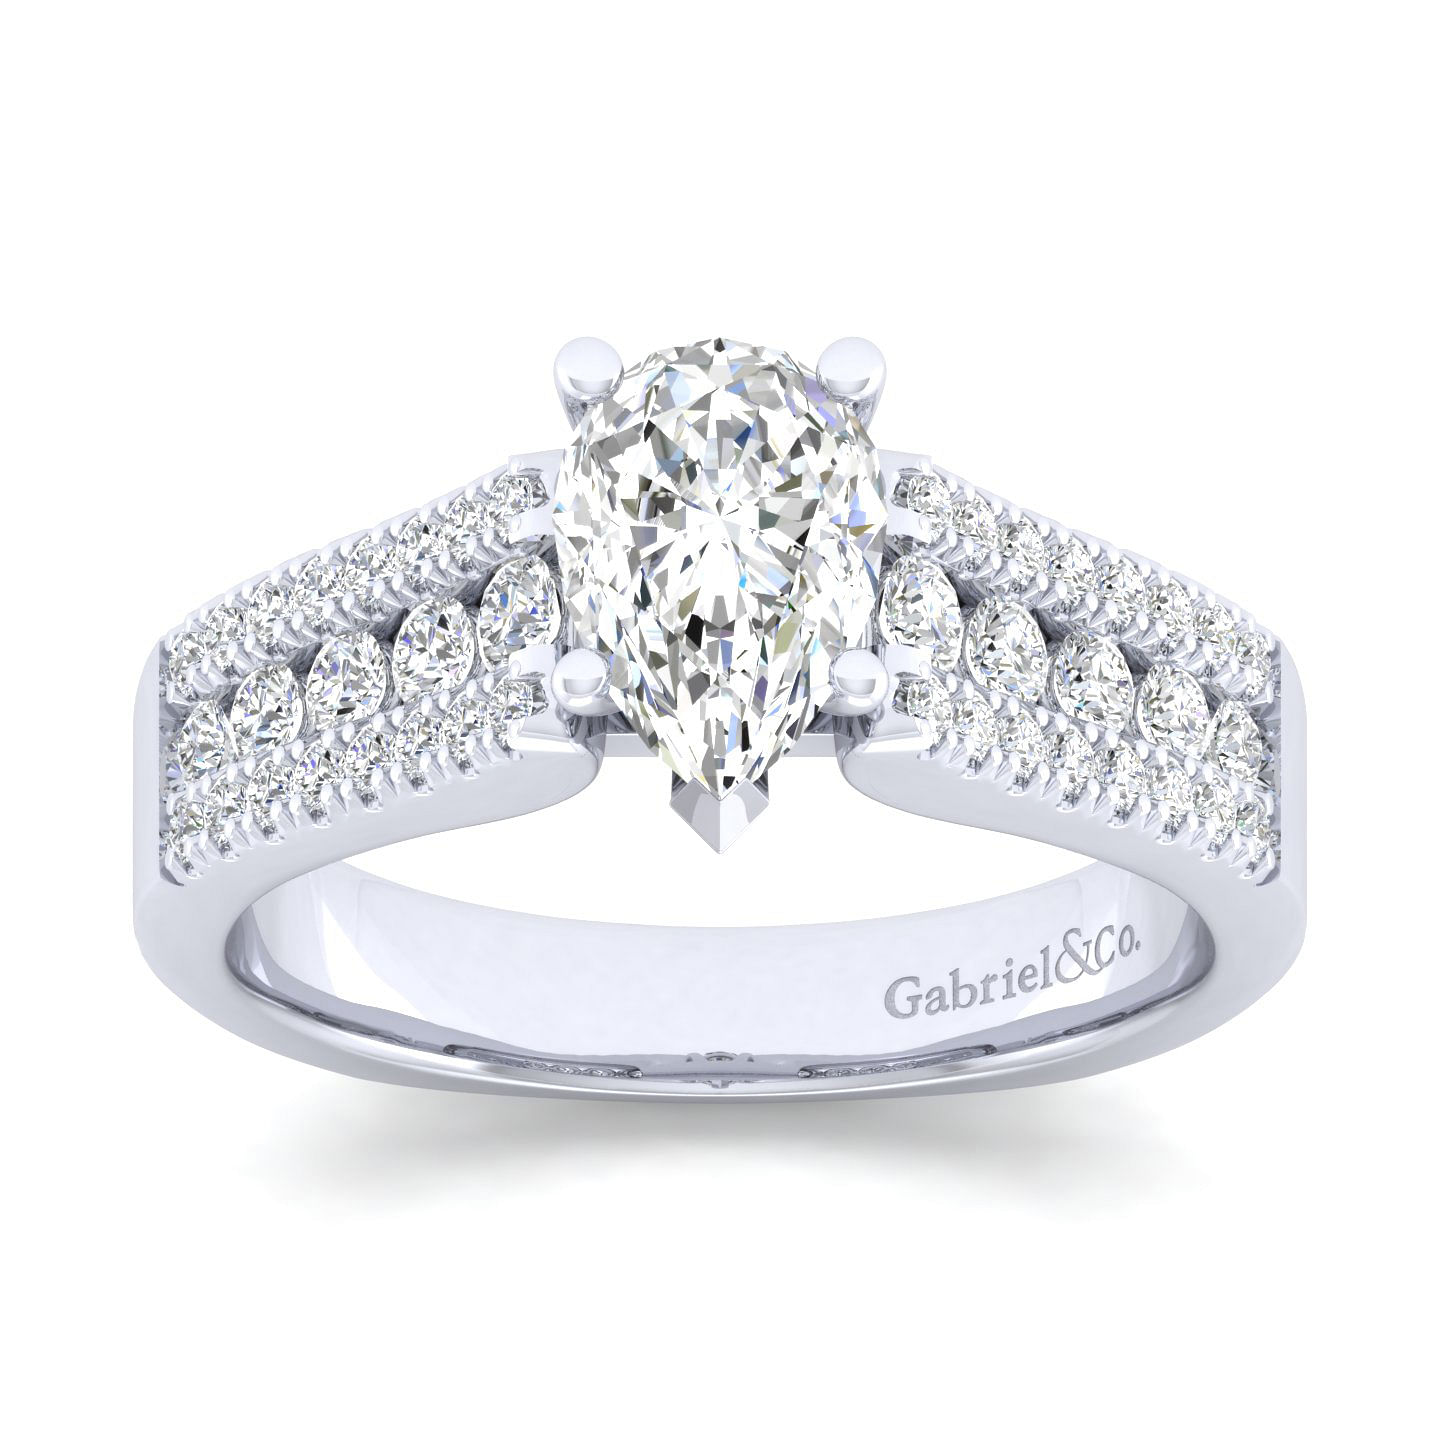 14K White Gold Wide Band Pear Shape Diamond Engagement Ring